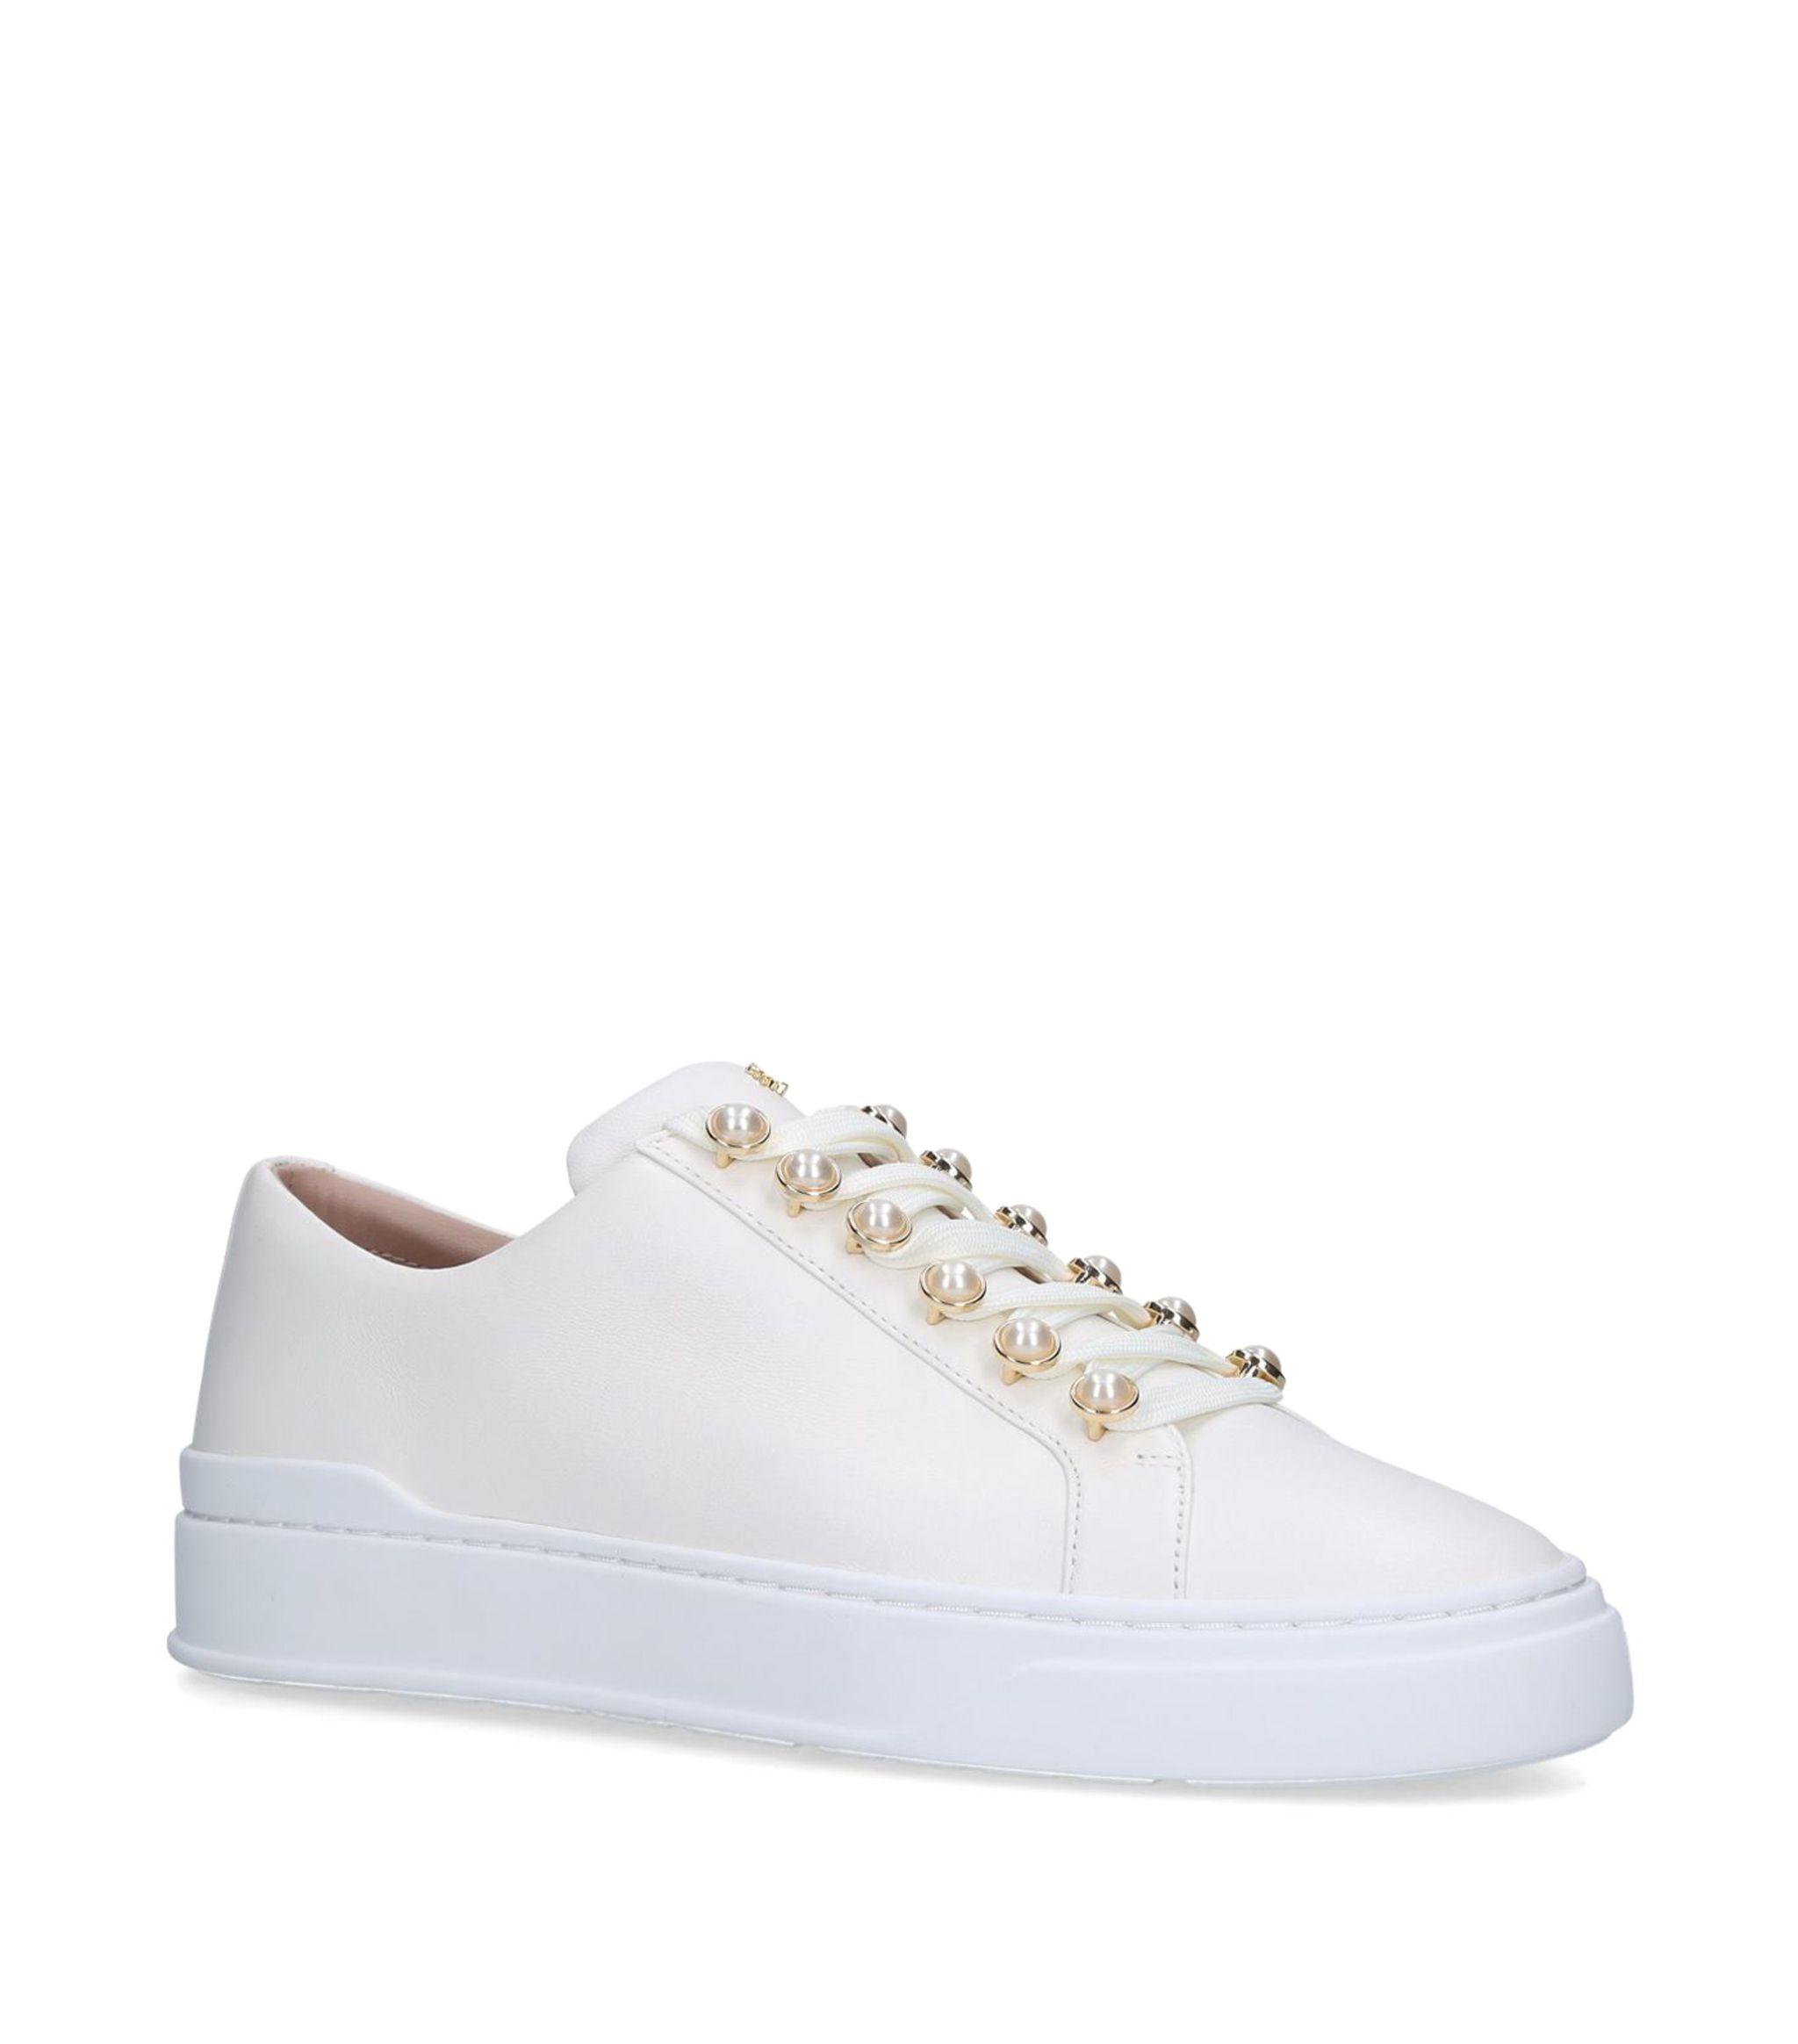 Stuart Weitzman Leather Excelsa Pearl Sneakers in White - Lyst